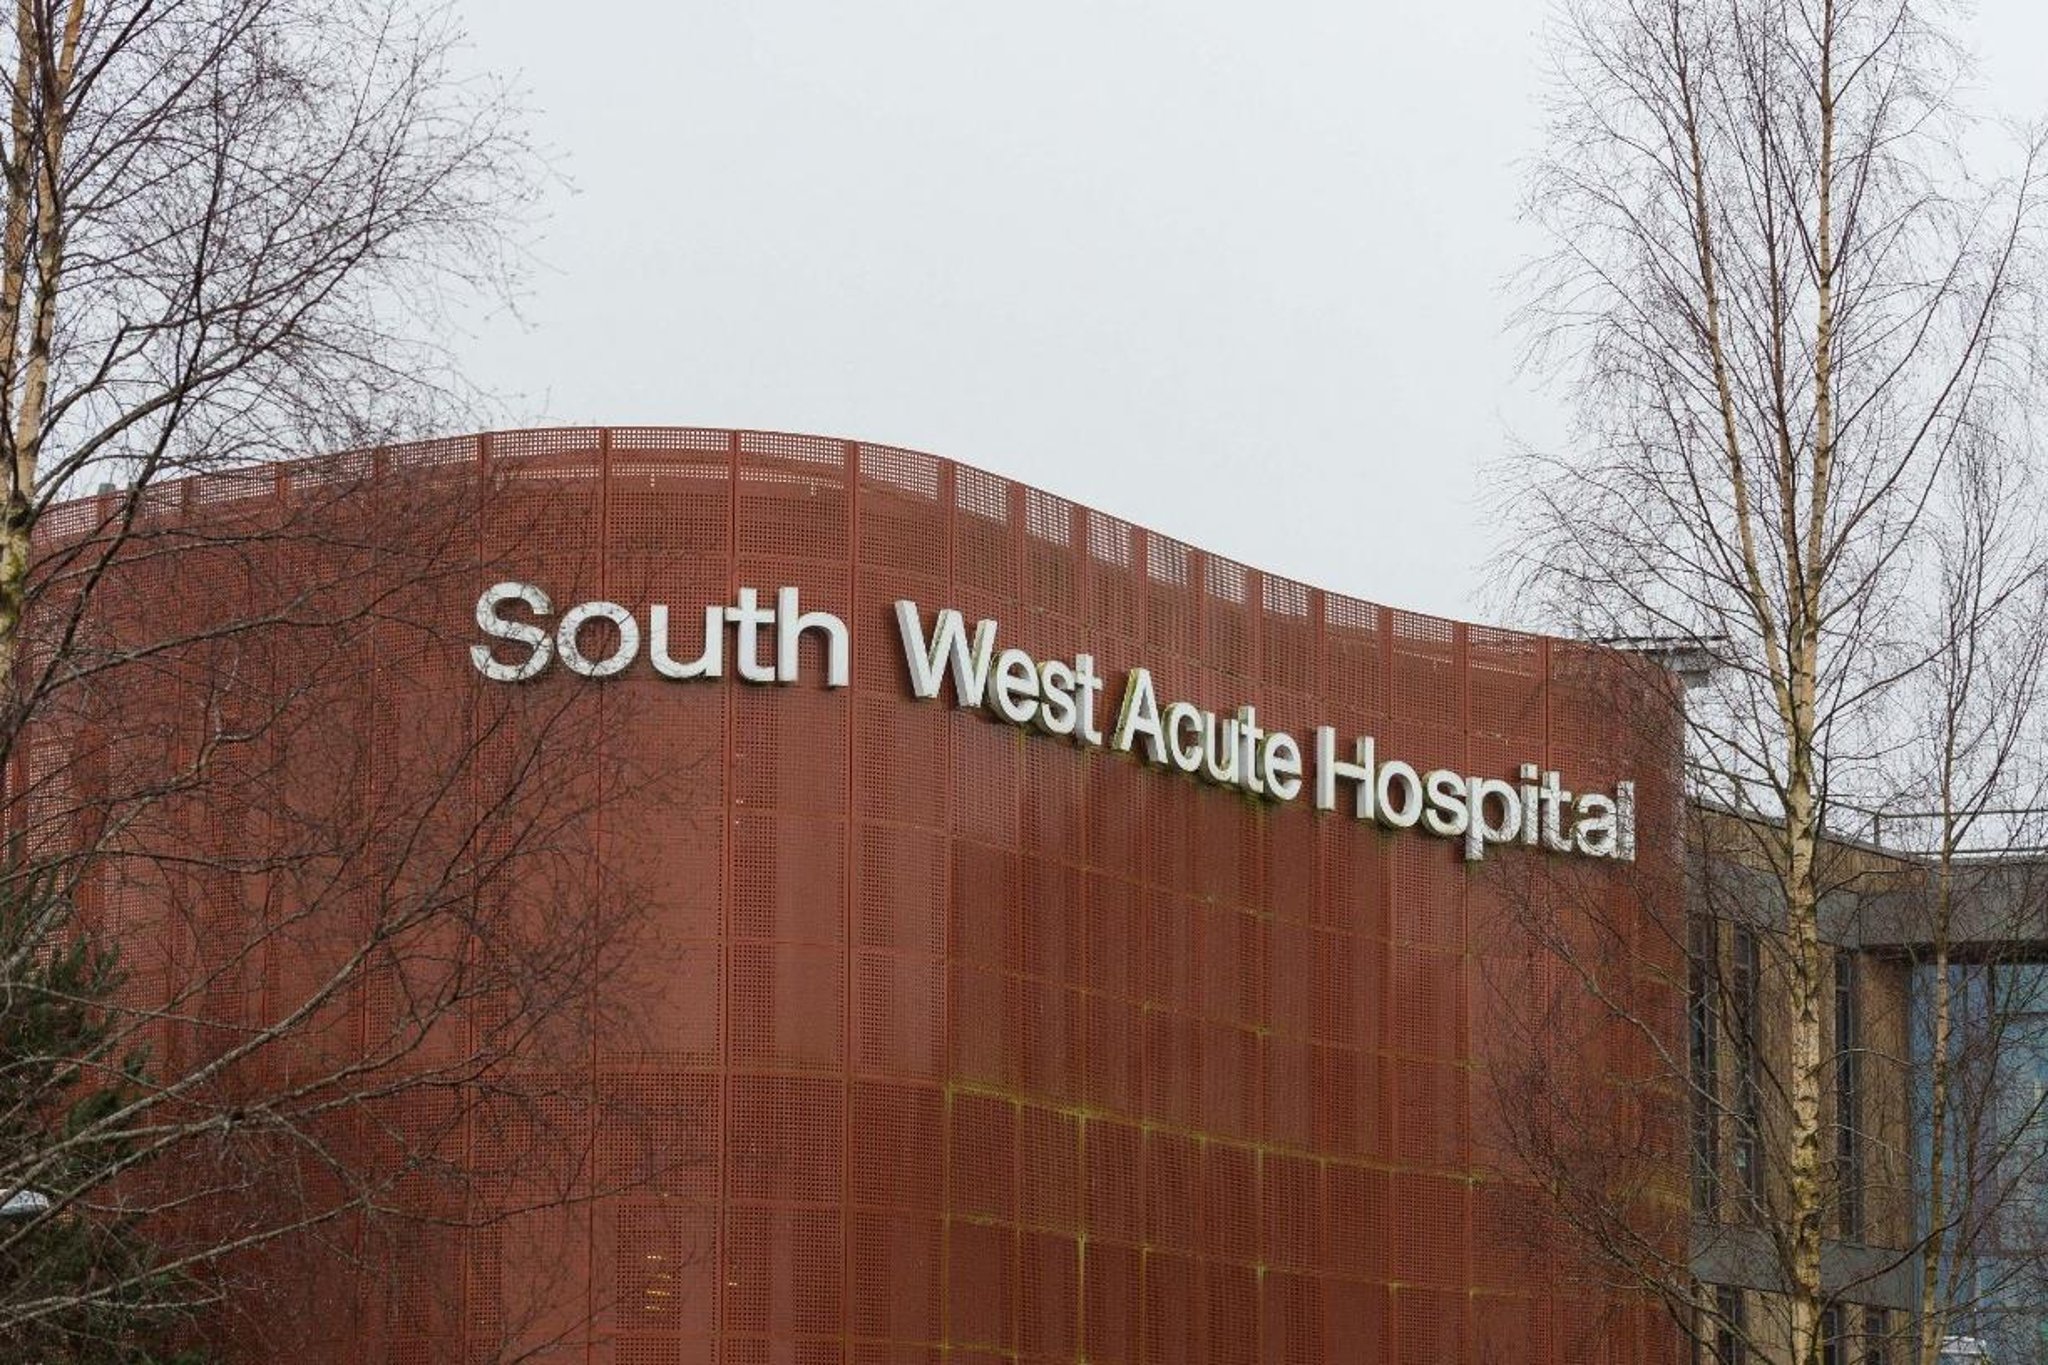 Windows smashed and bag stolen from health worker's car outside NI hospital